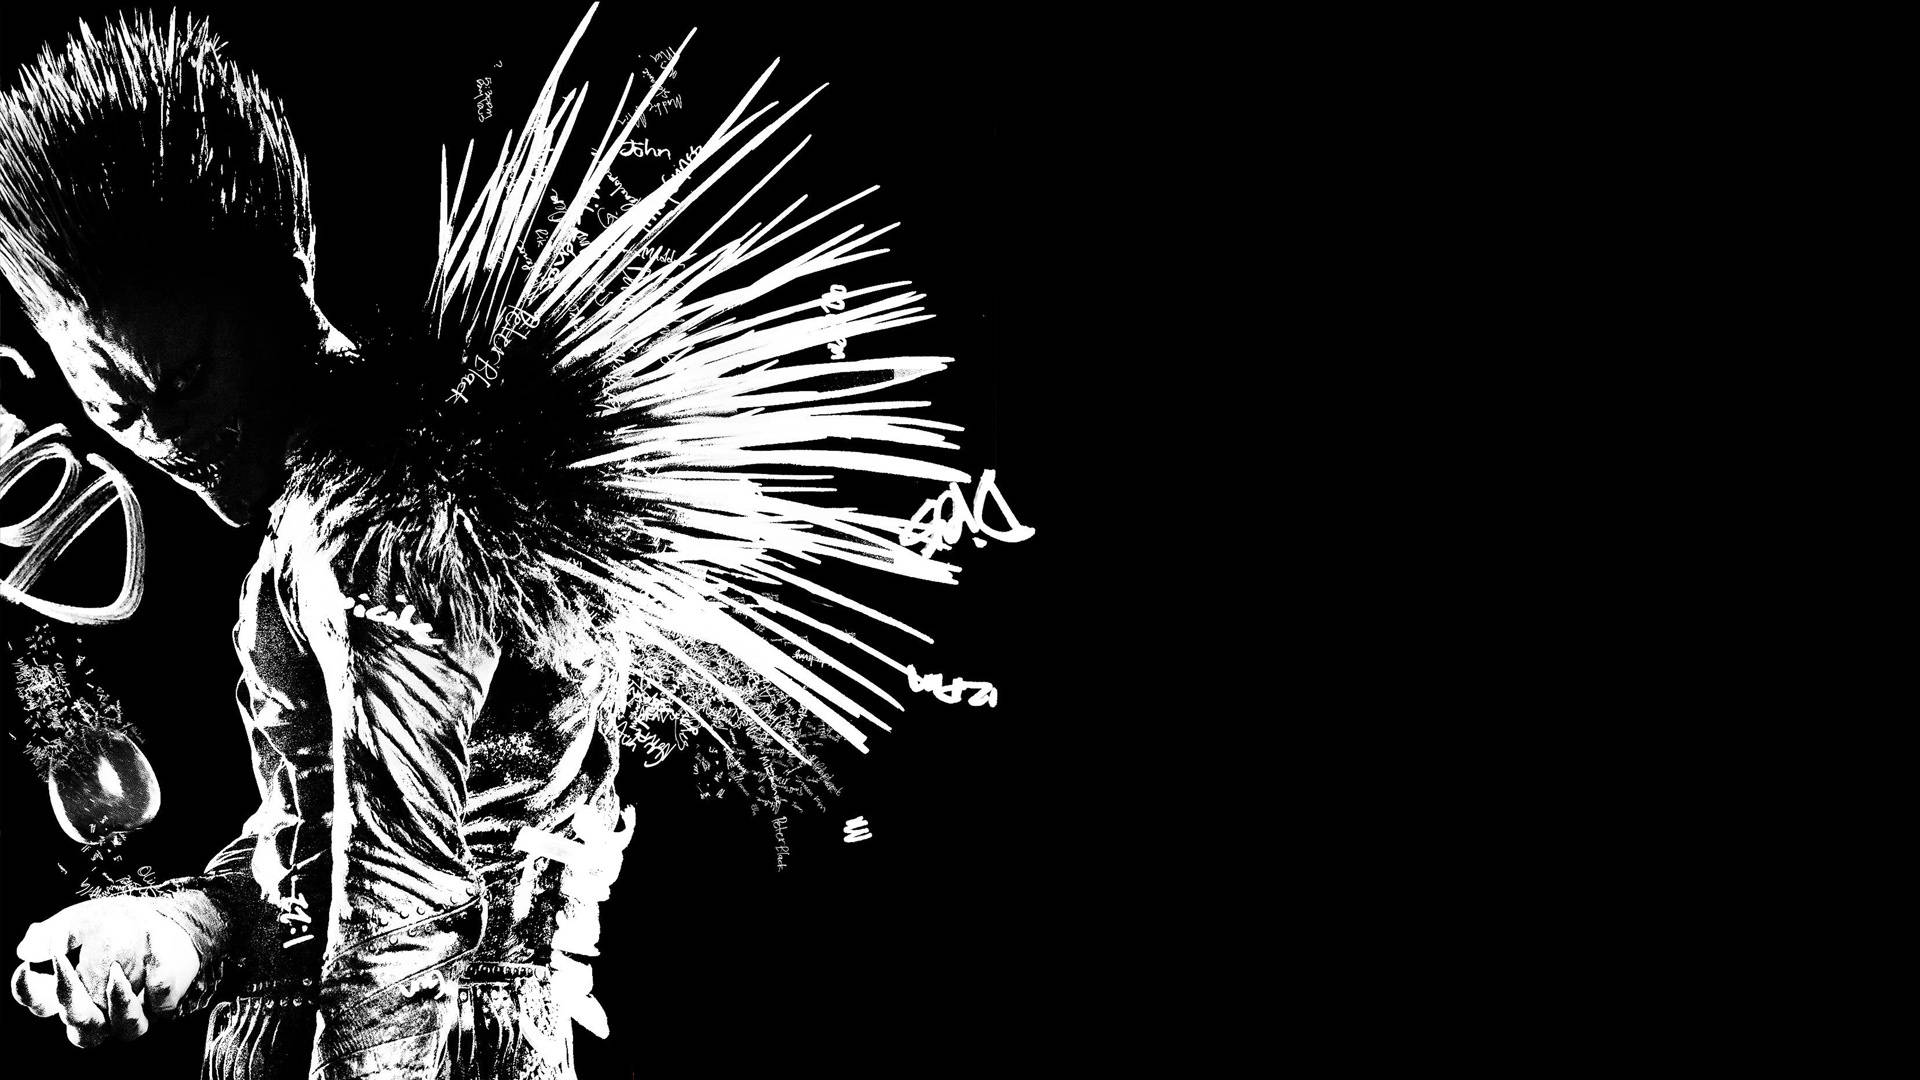 "Ryuk, Shinigami from the Anime Death Note" Wallpaper